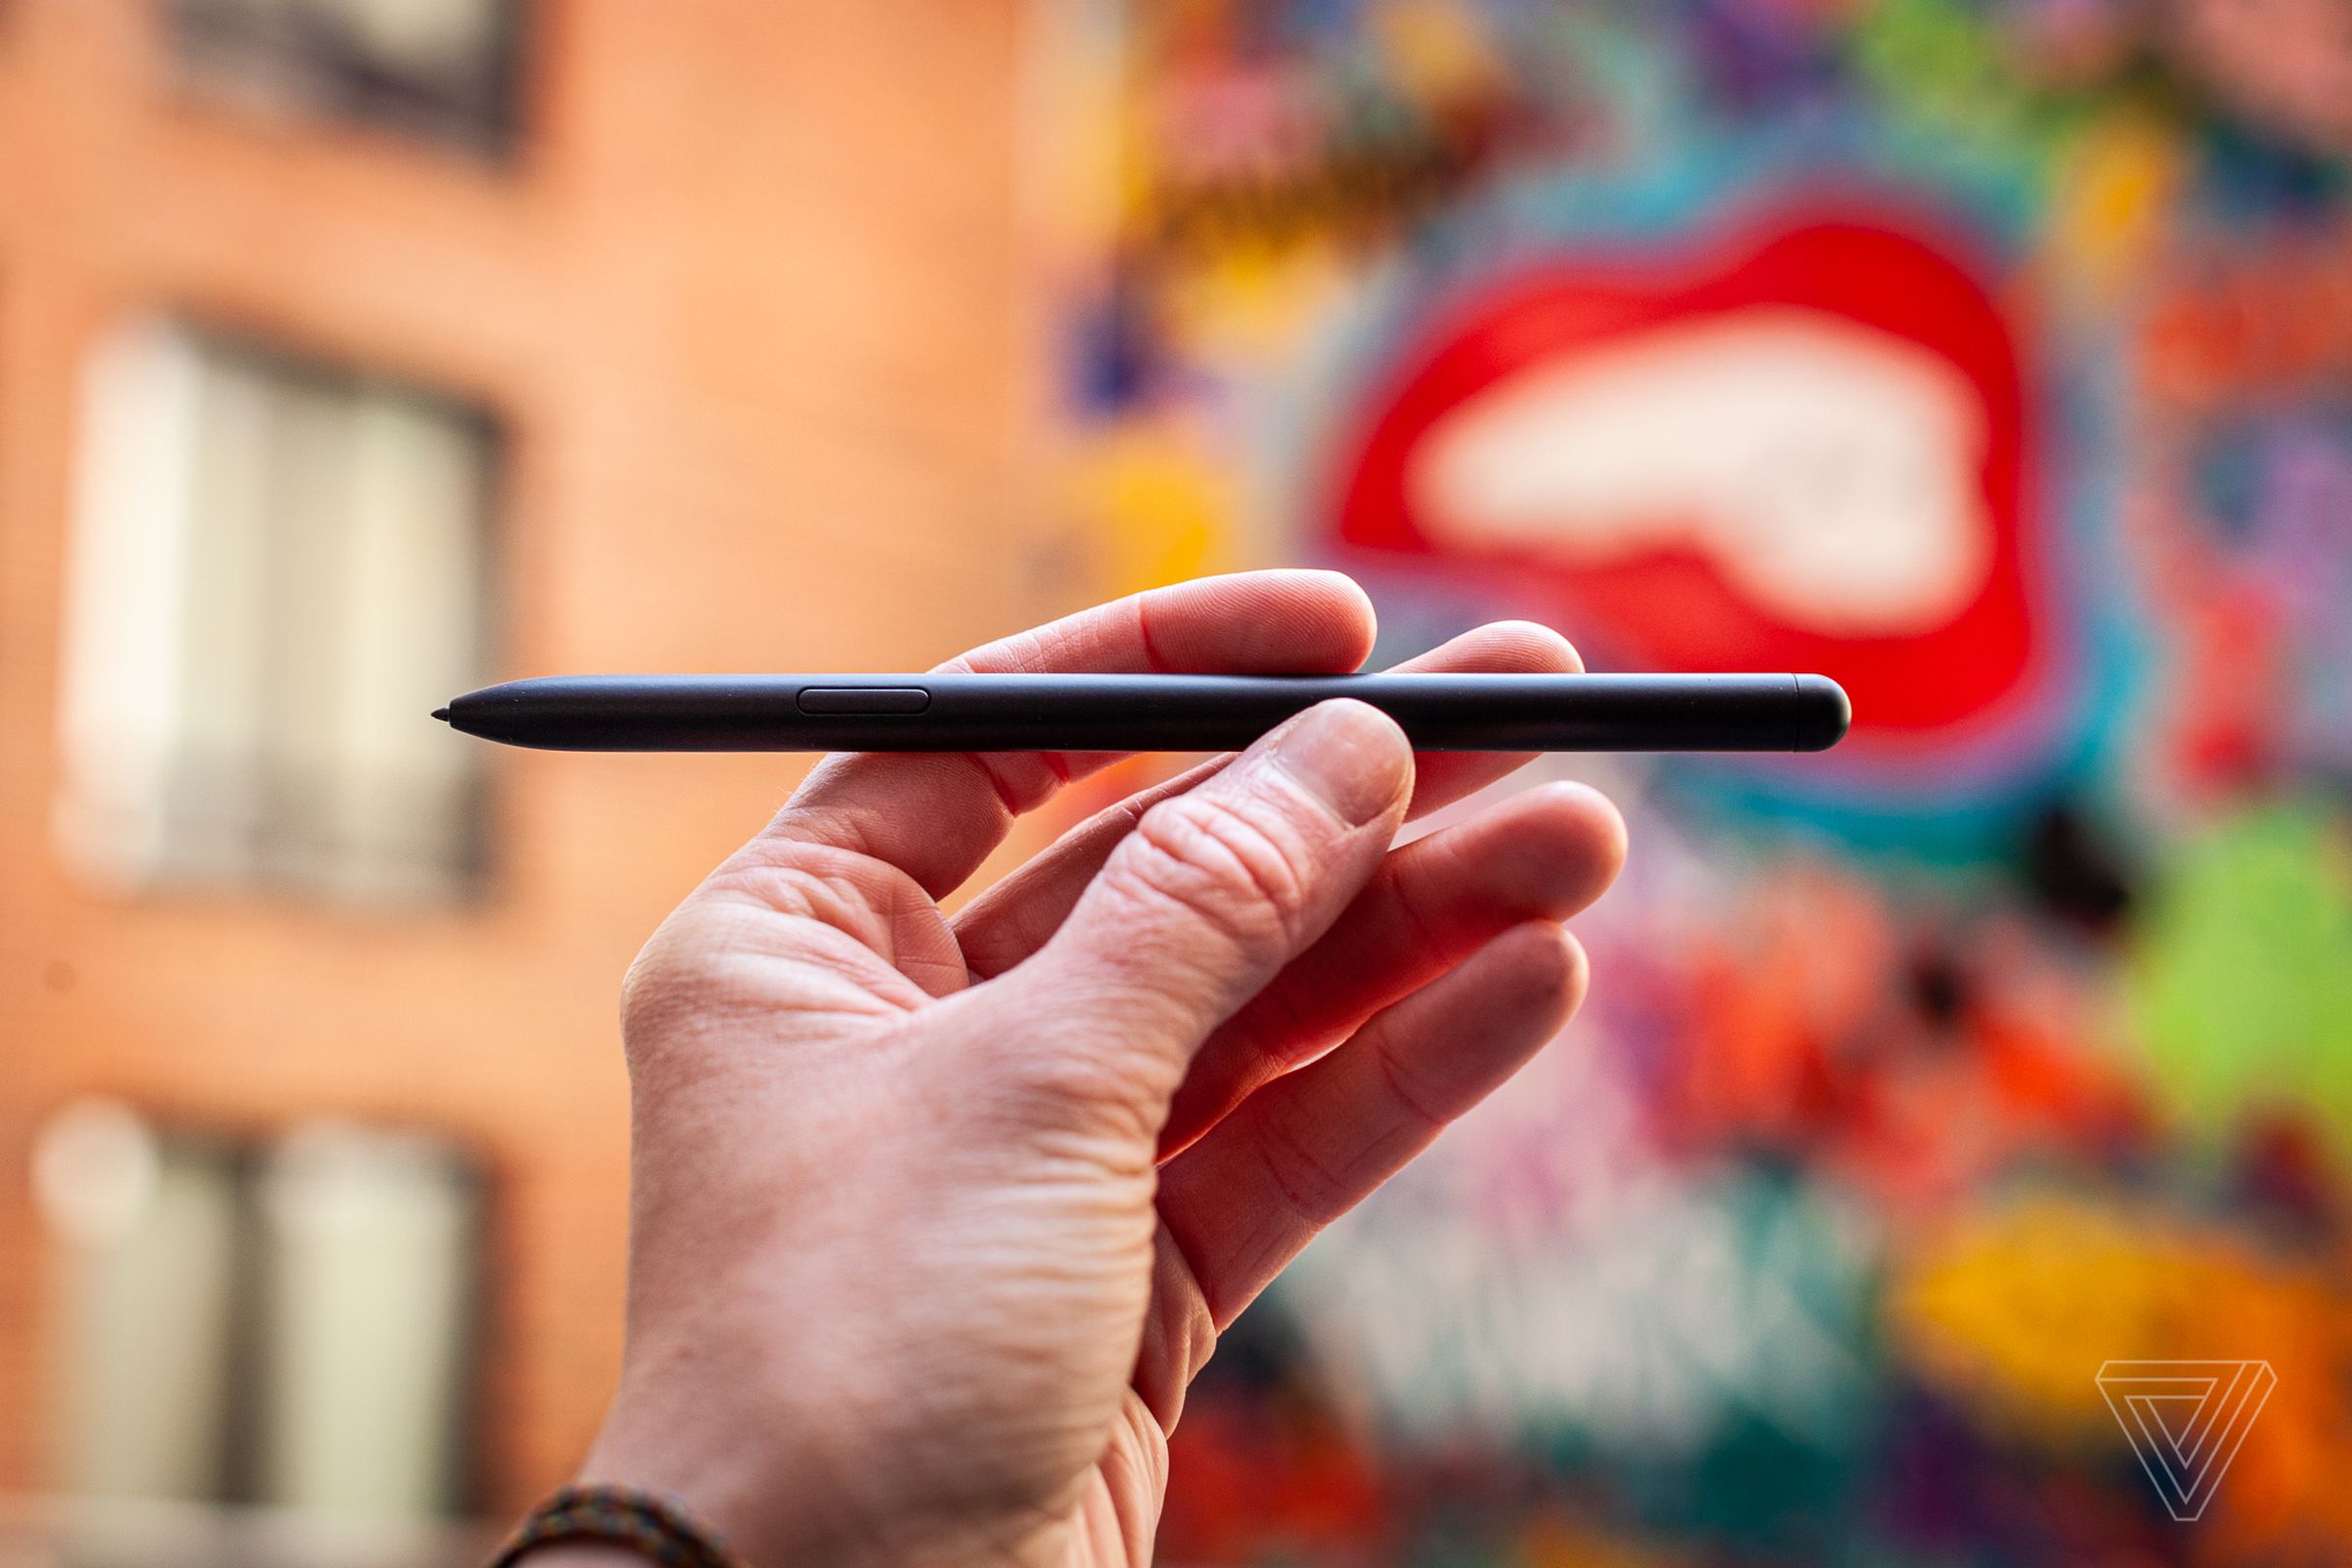 A hand holds the S-Pen in front of a colorful wall.